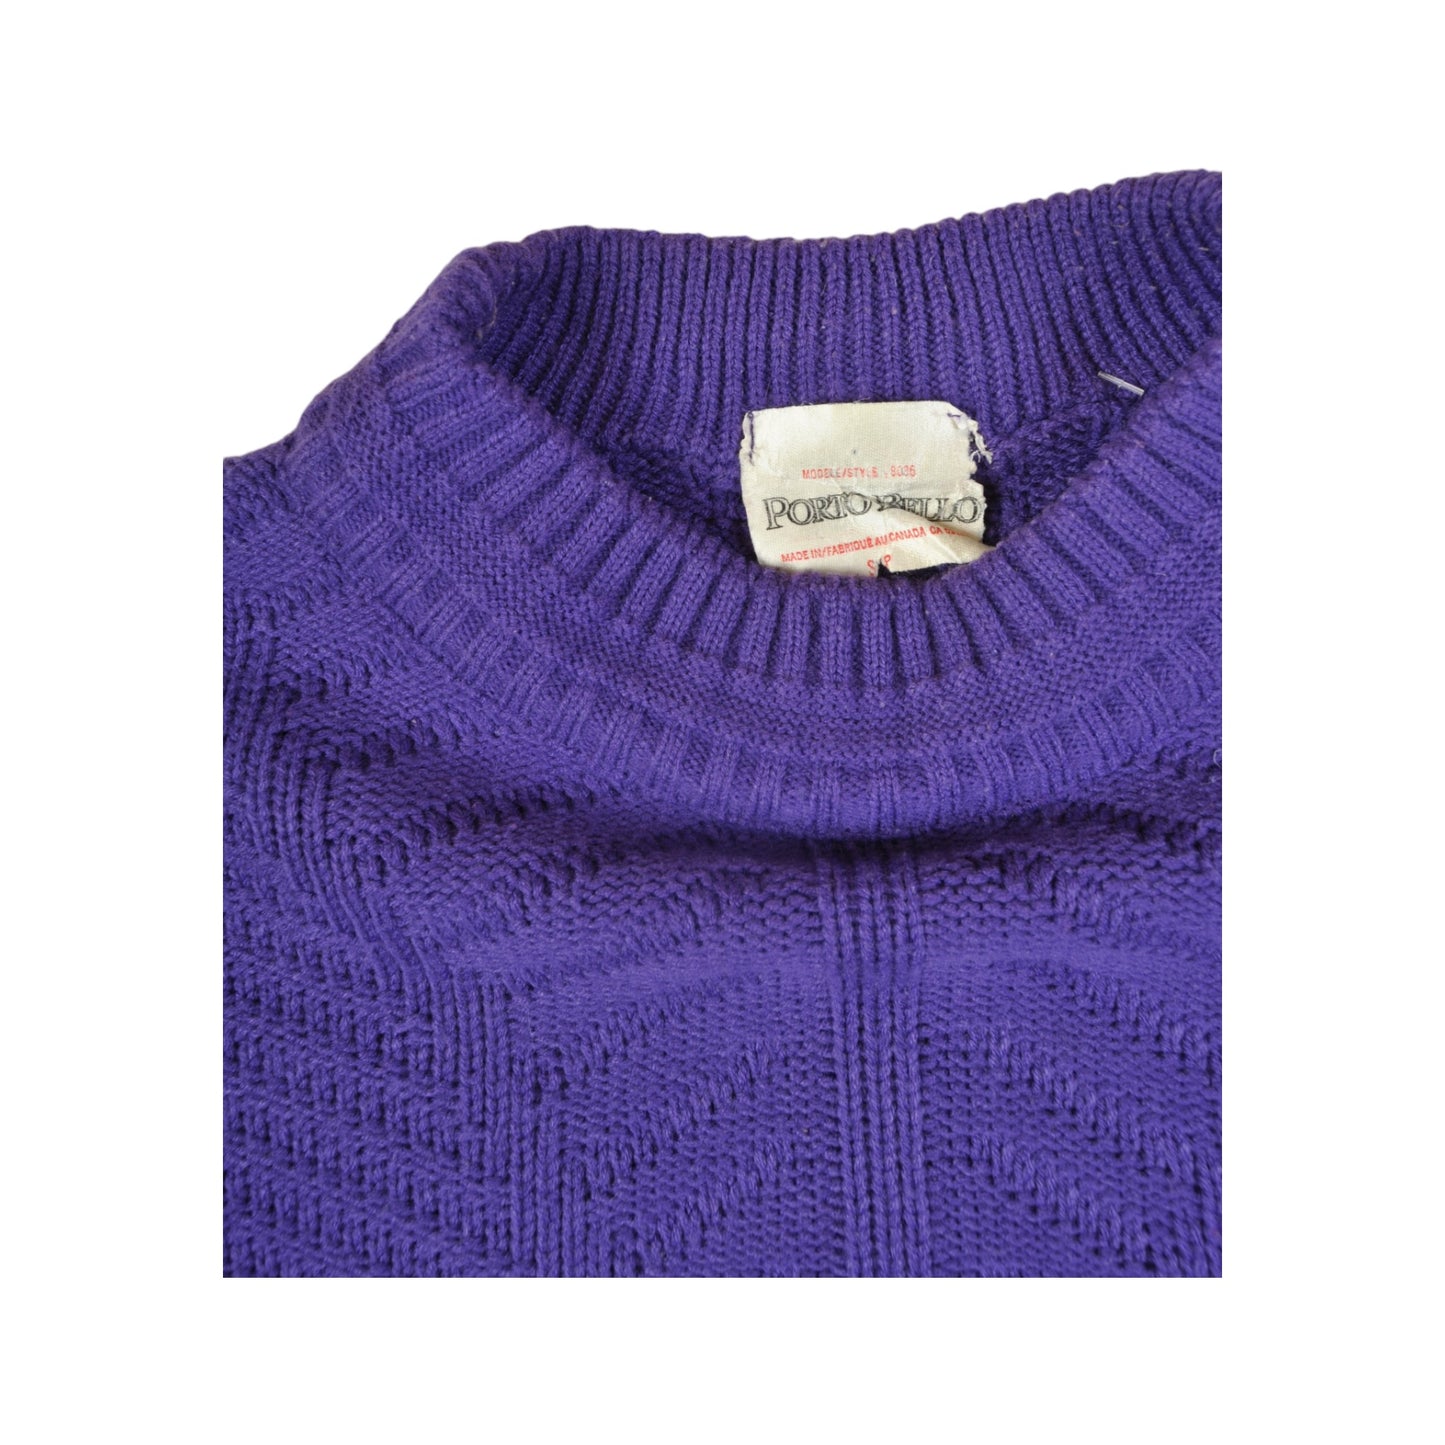 Vintage Cable Knit Knitted Jumper Purple Small